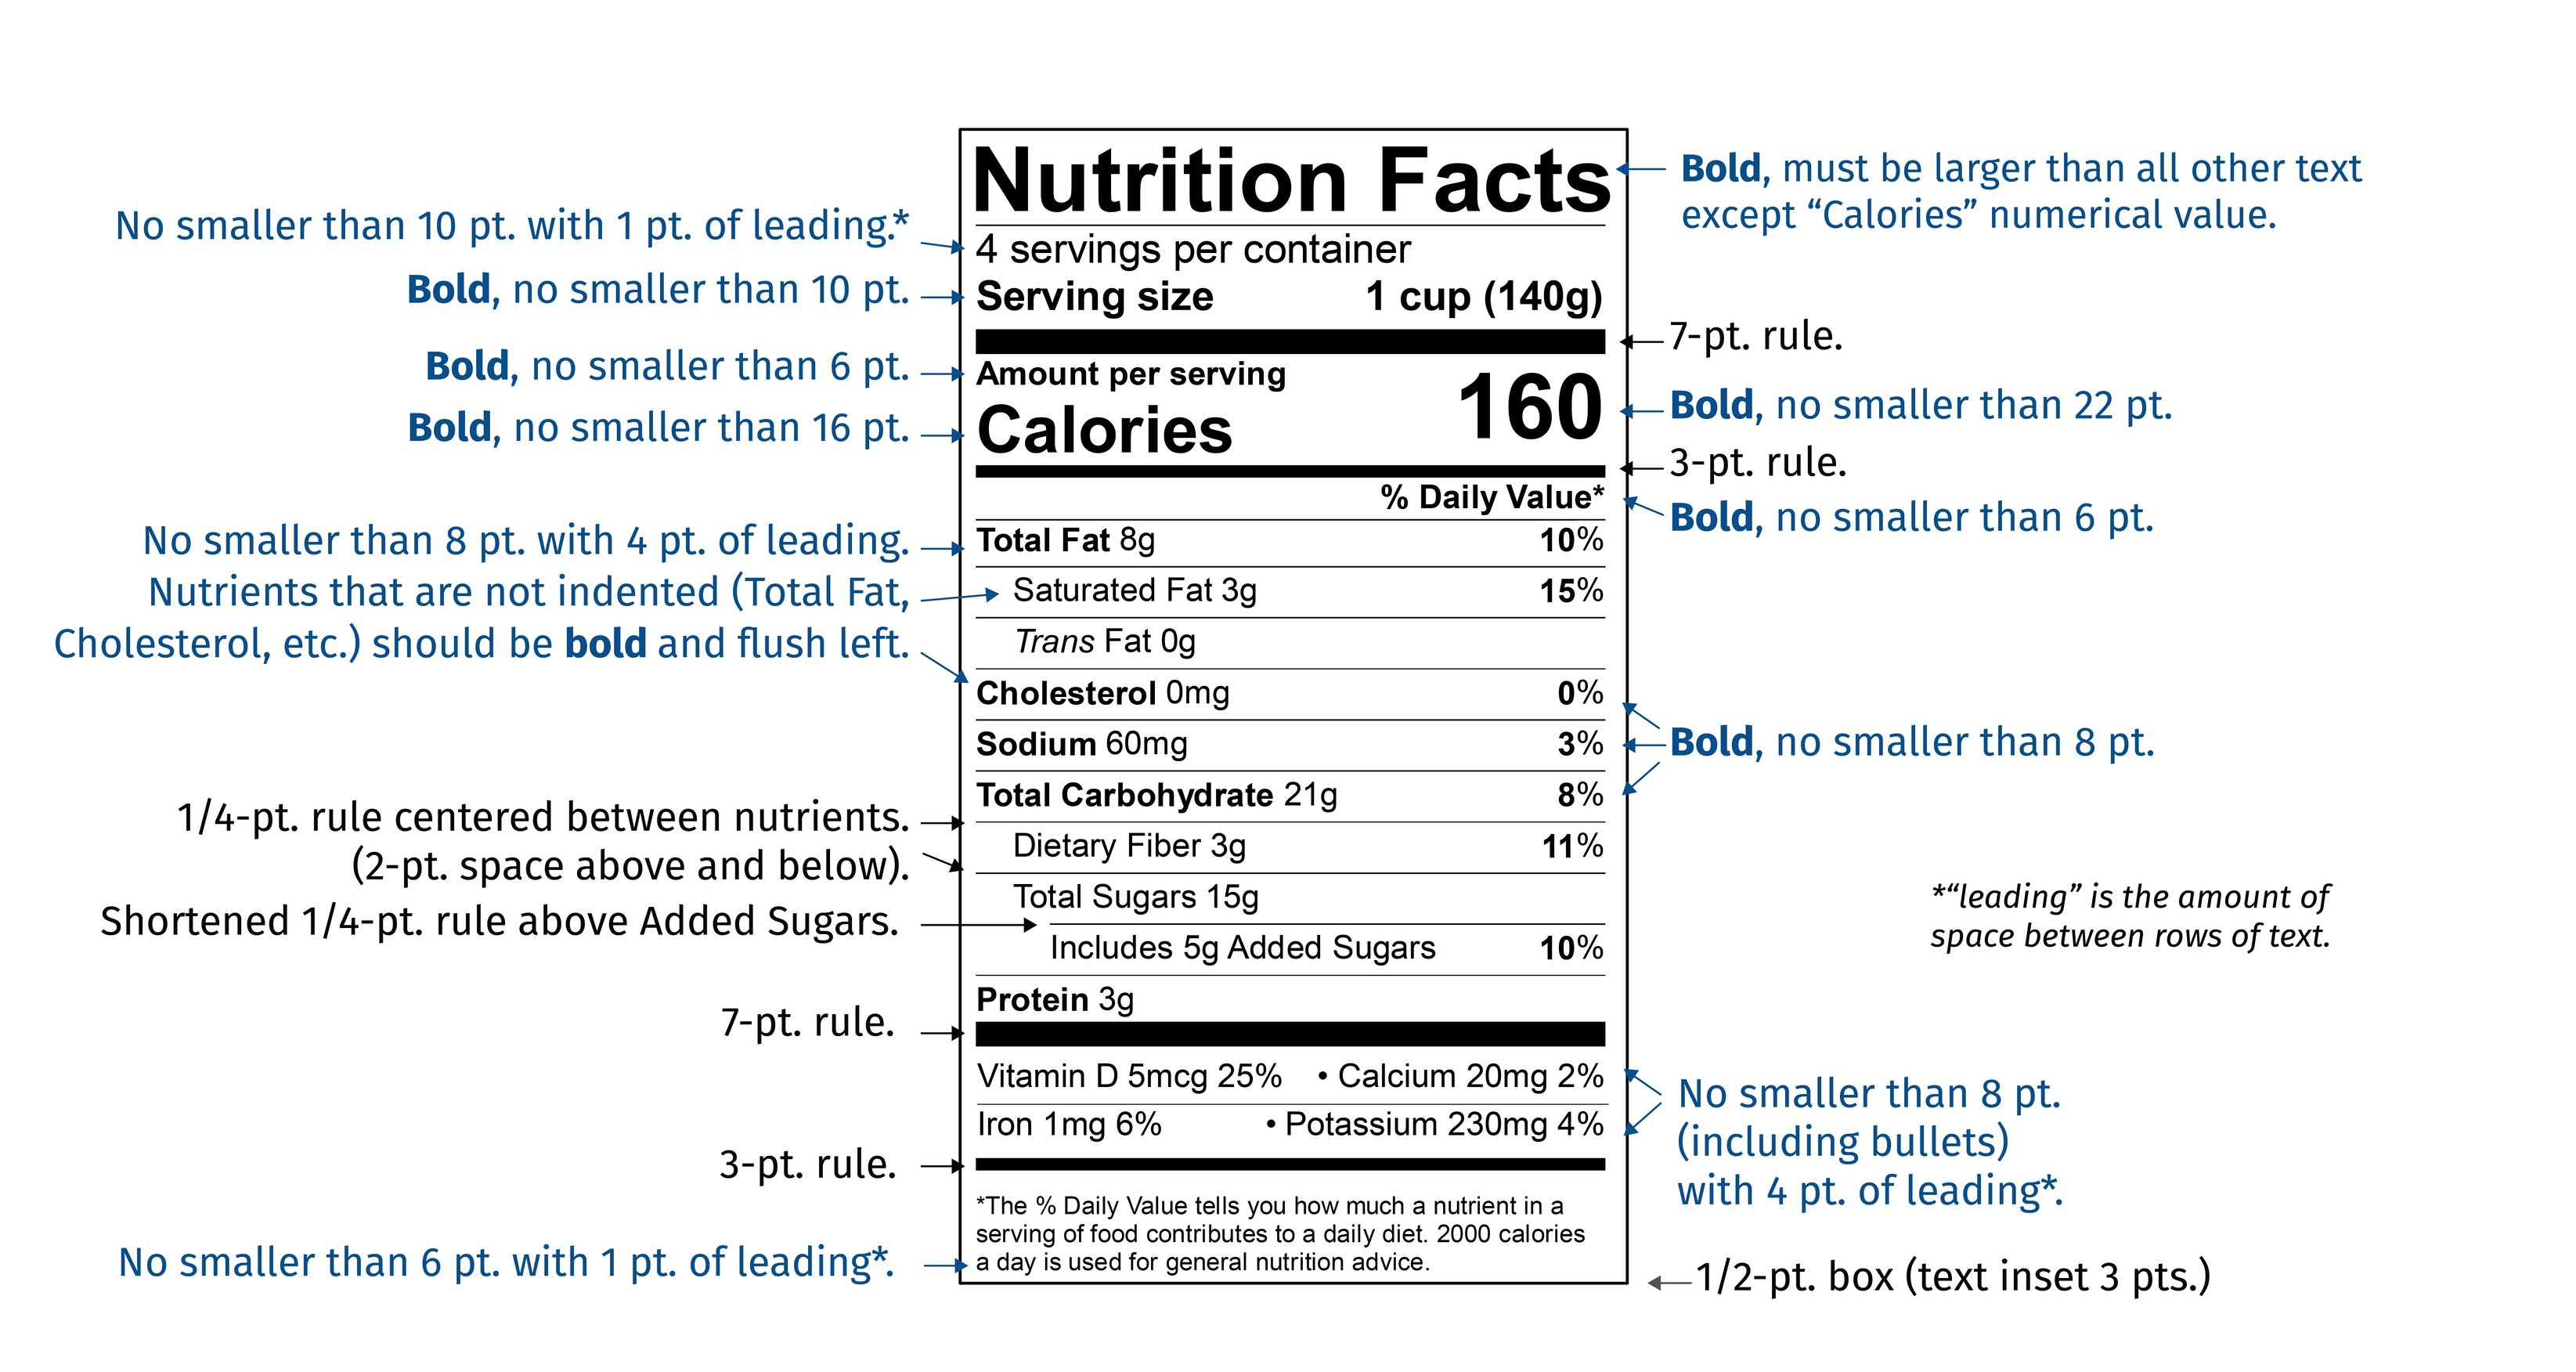 New FDA Nutrition Facts Label Font Style and Size